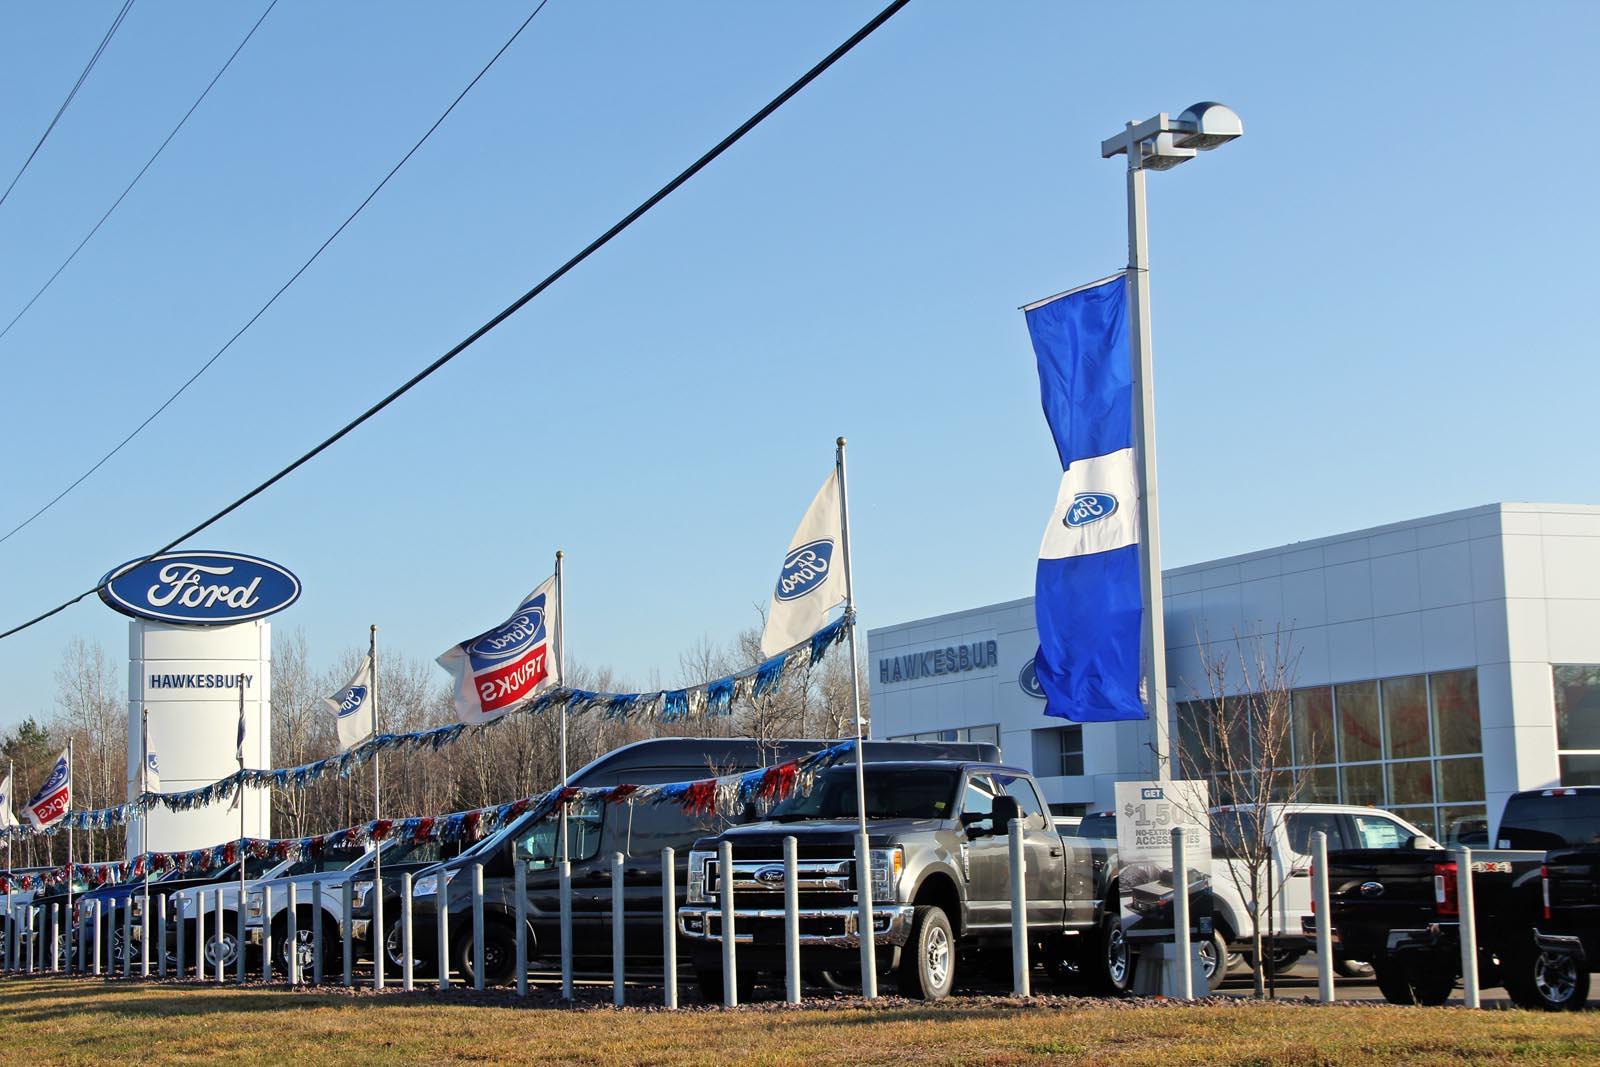 Two trucks stolen from Ford dealership in broad daylight